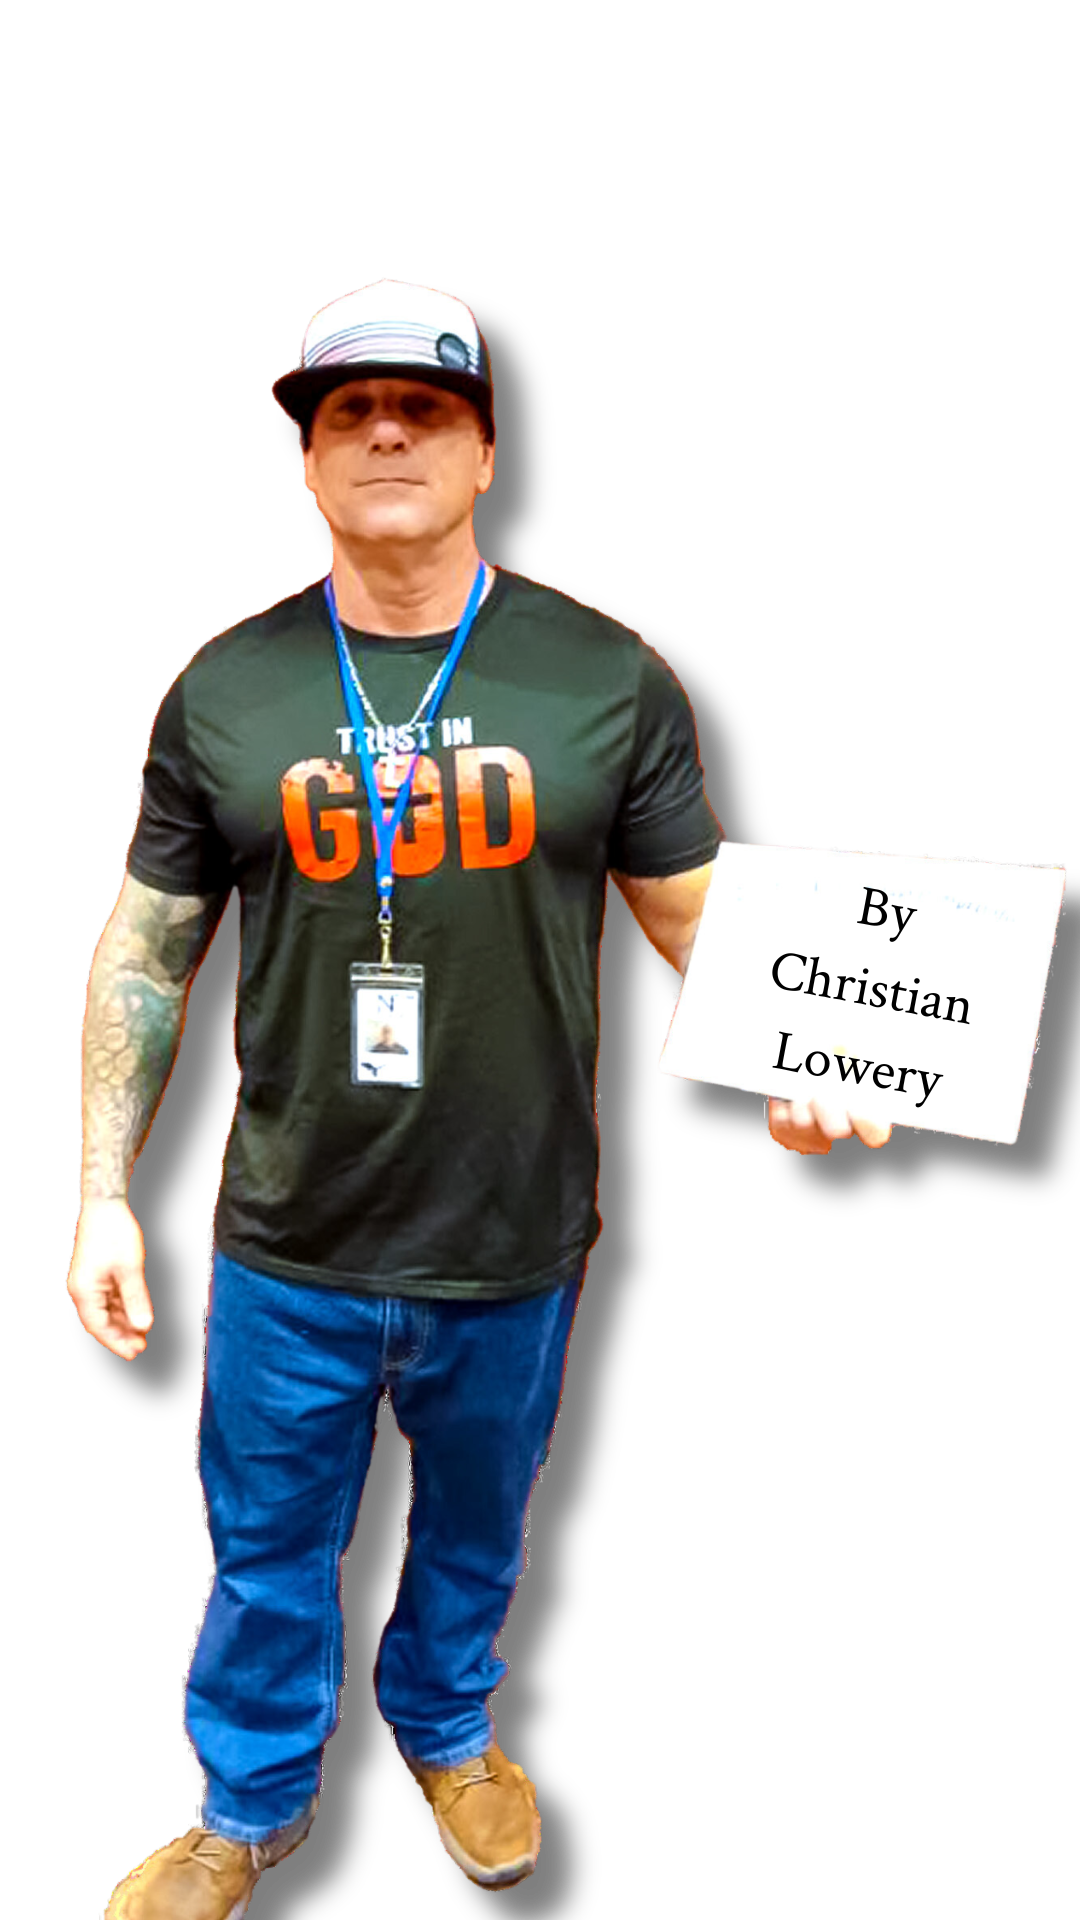 "Image of a man named Christian Lowery, wearing a 'TRUST IN GOD' T-shirt, showcasing his personal belief and commitment."